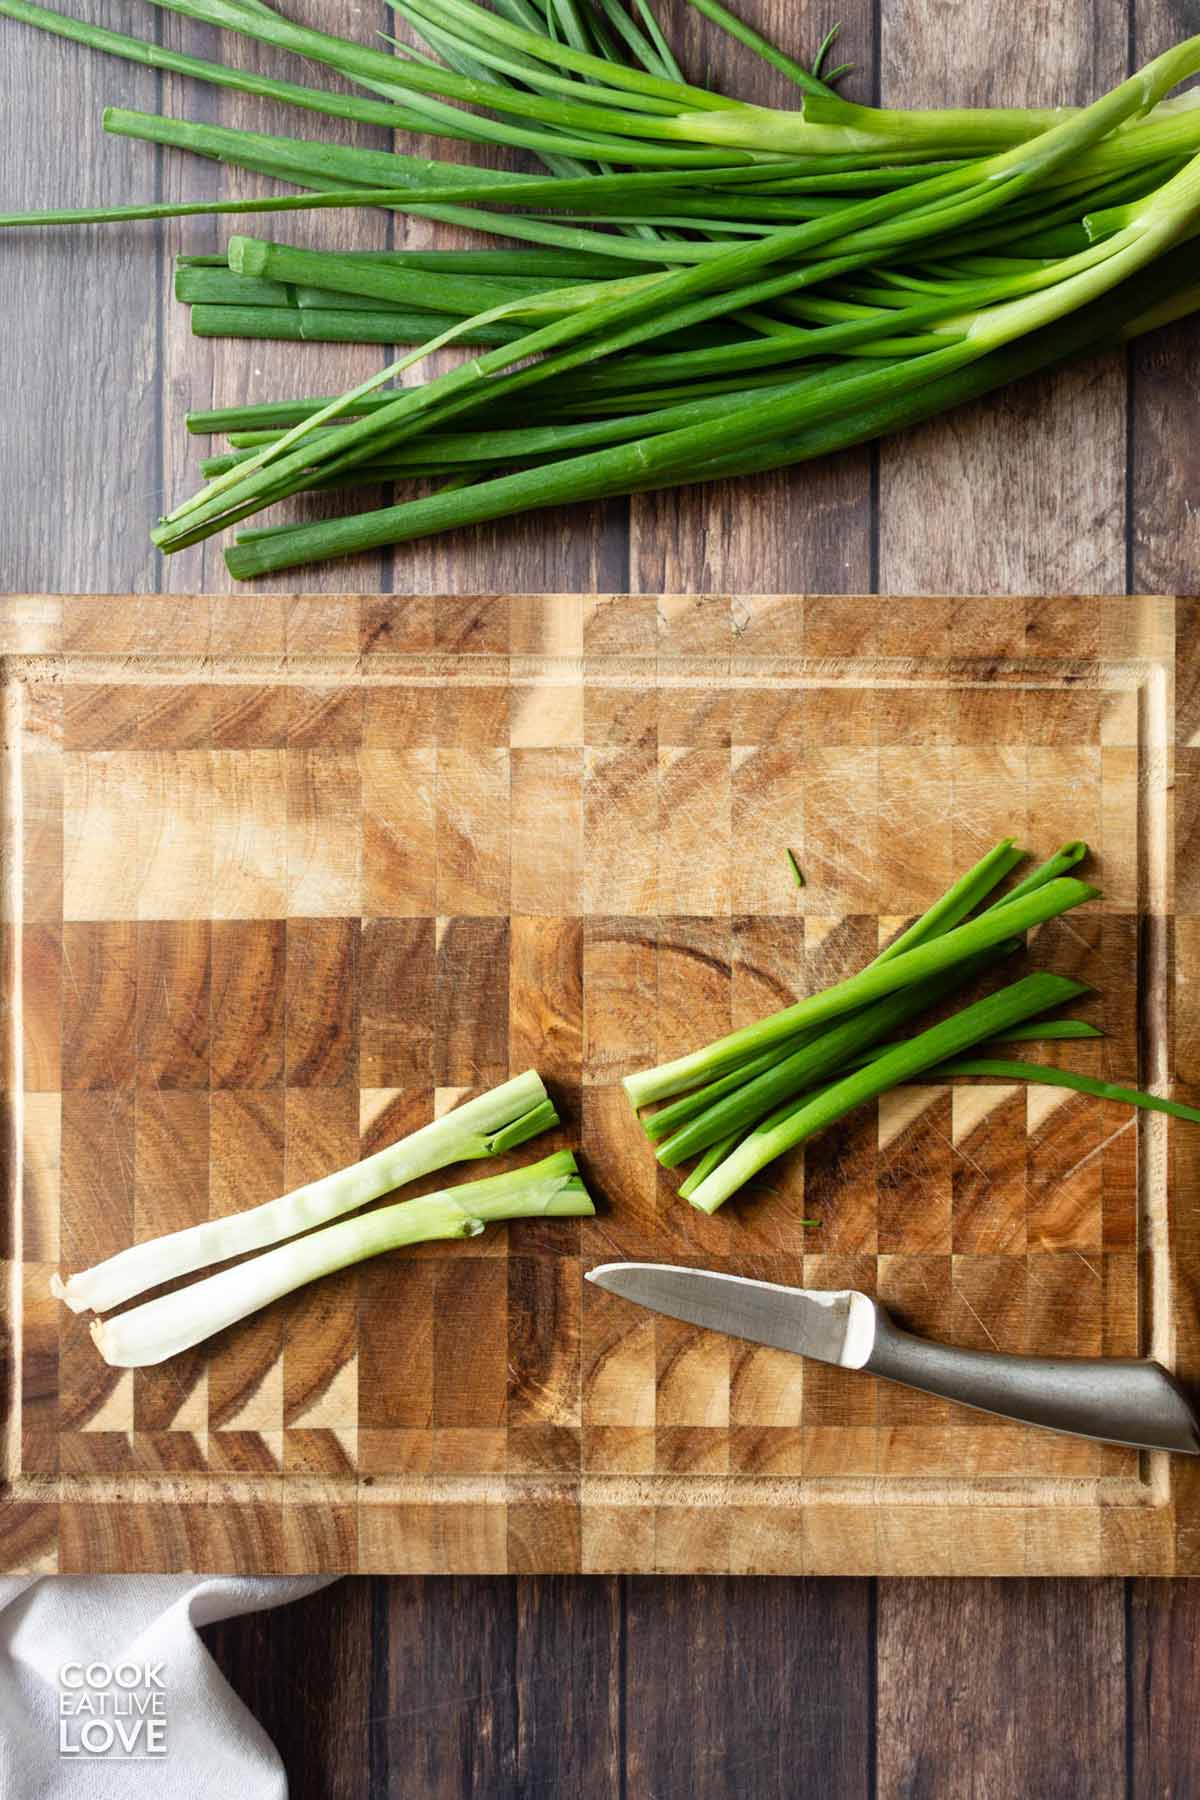 A bunch of onions cut at the white and green part.